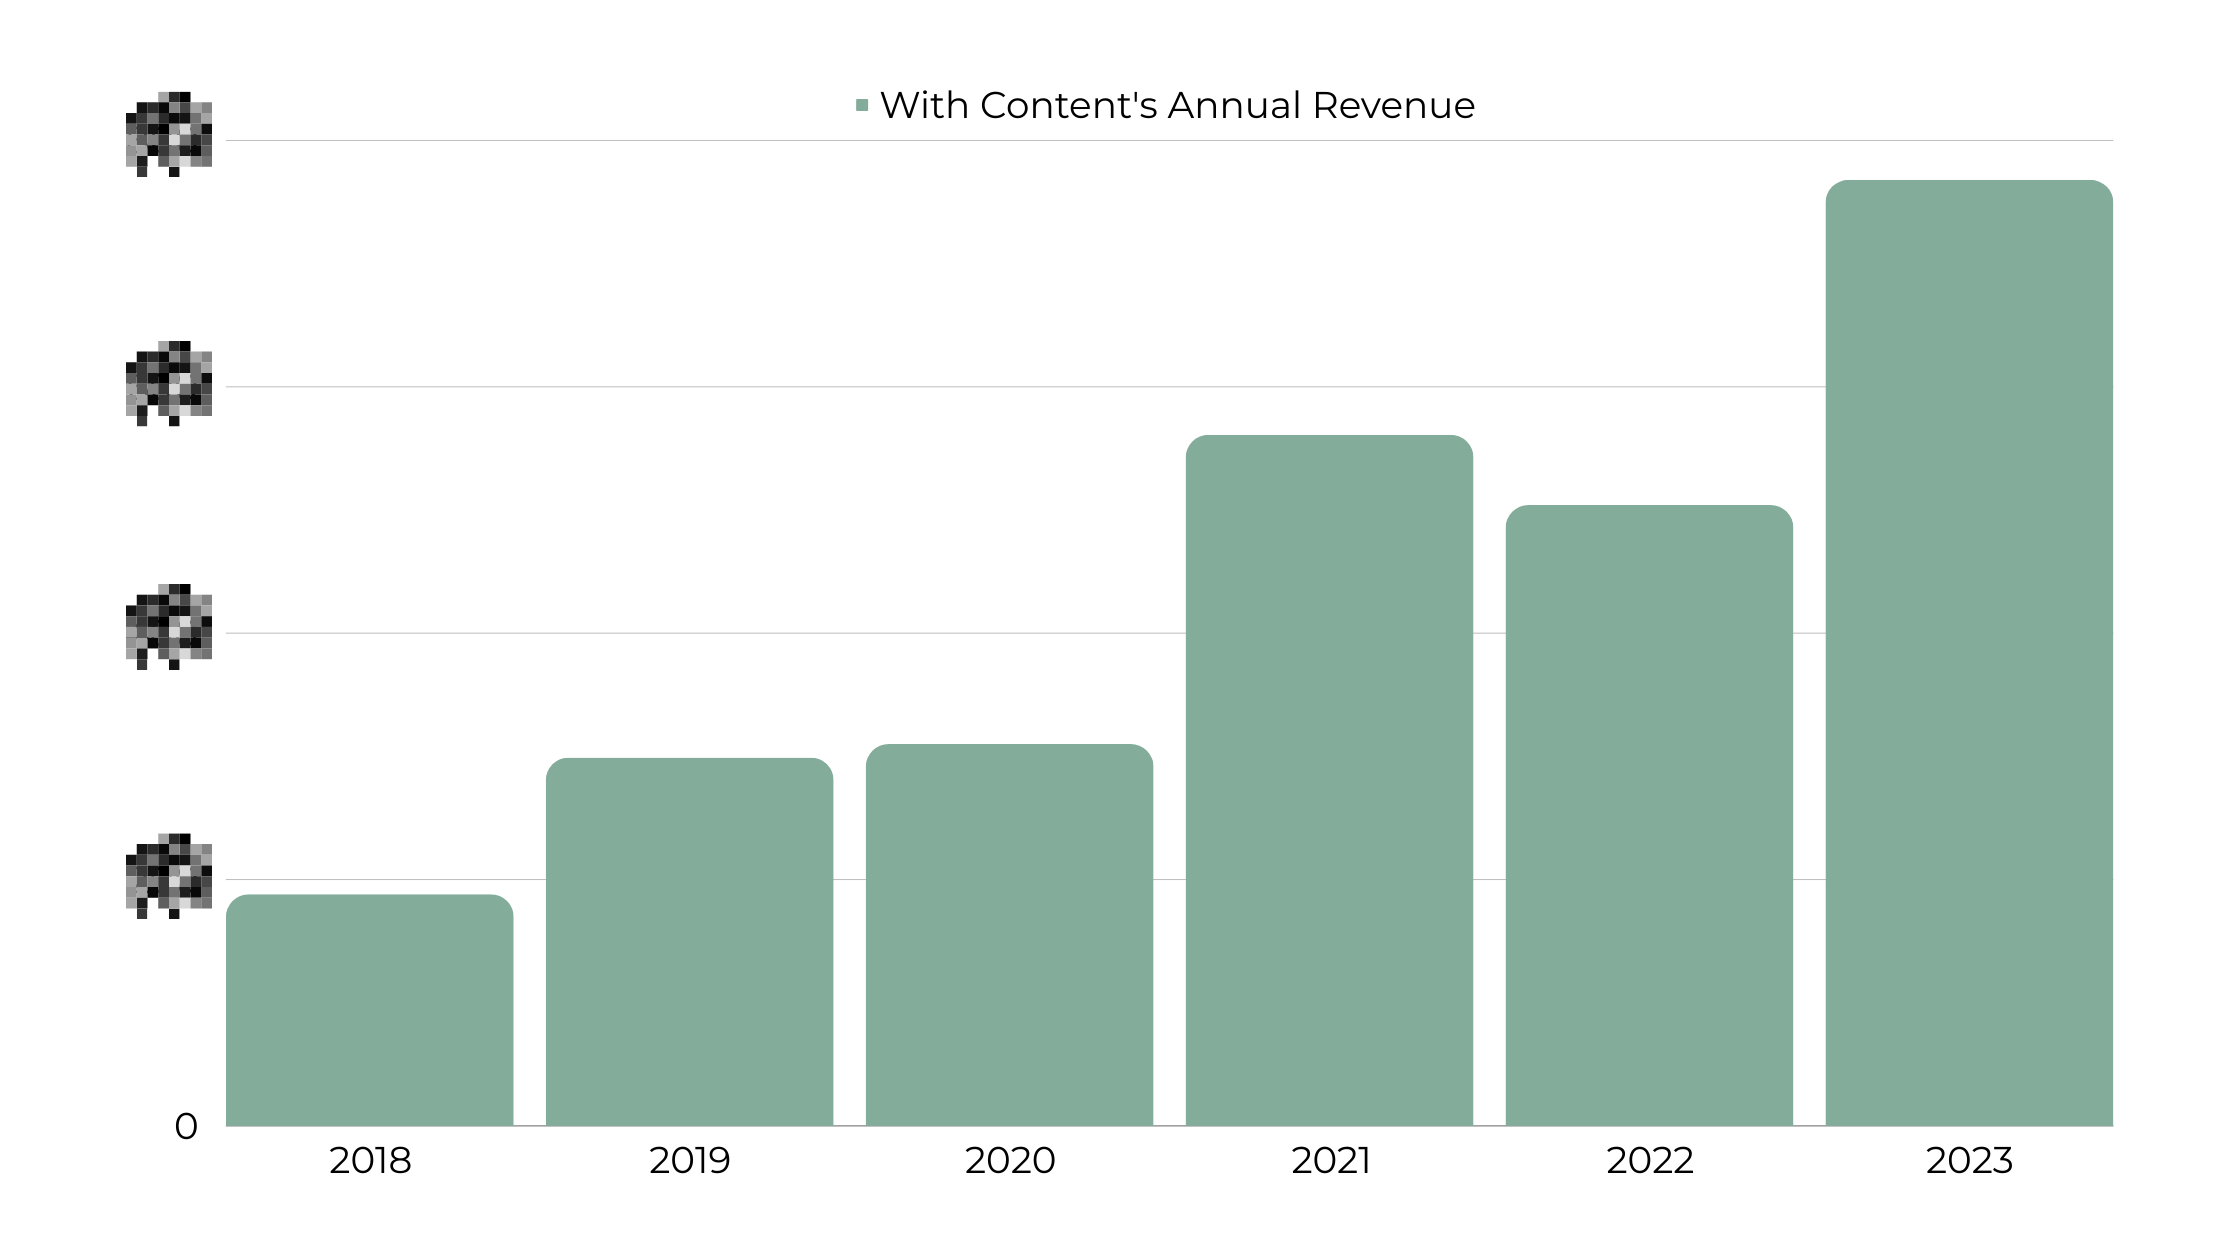 with content annual revenue 2018 to 2023